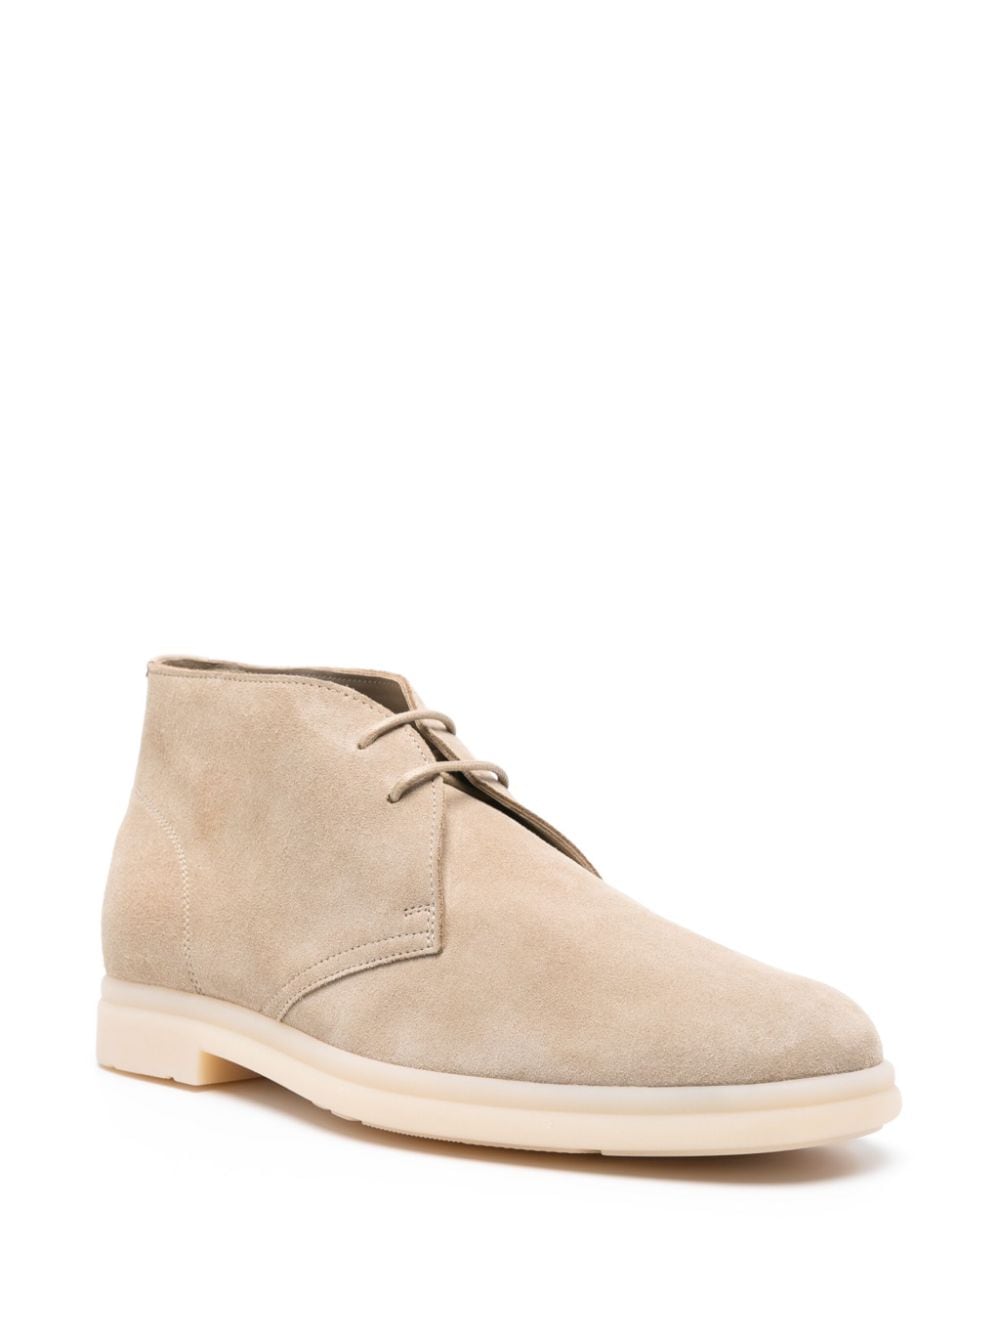 Image 2 of Church's suede lace-up boots